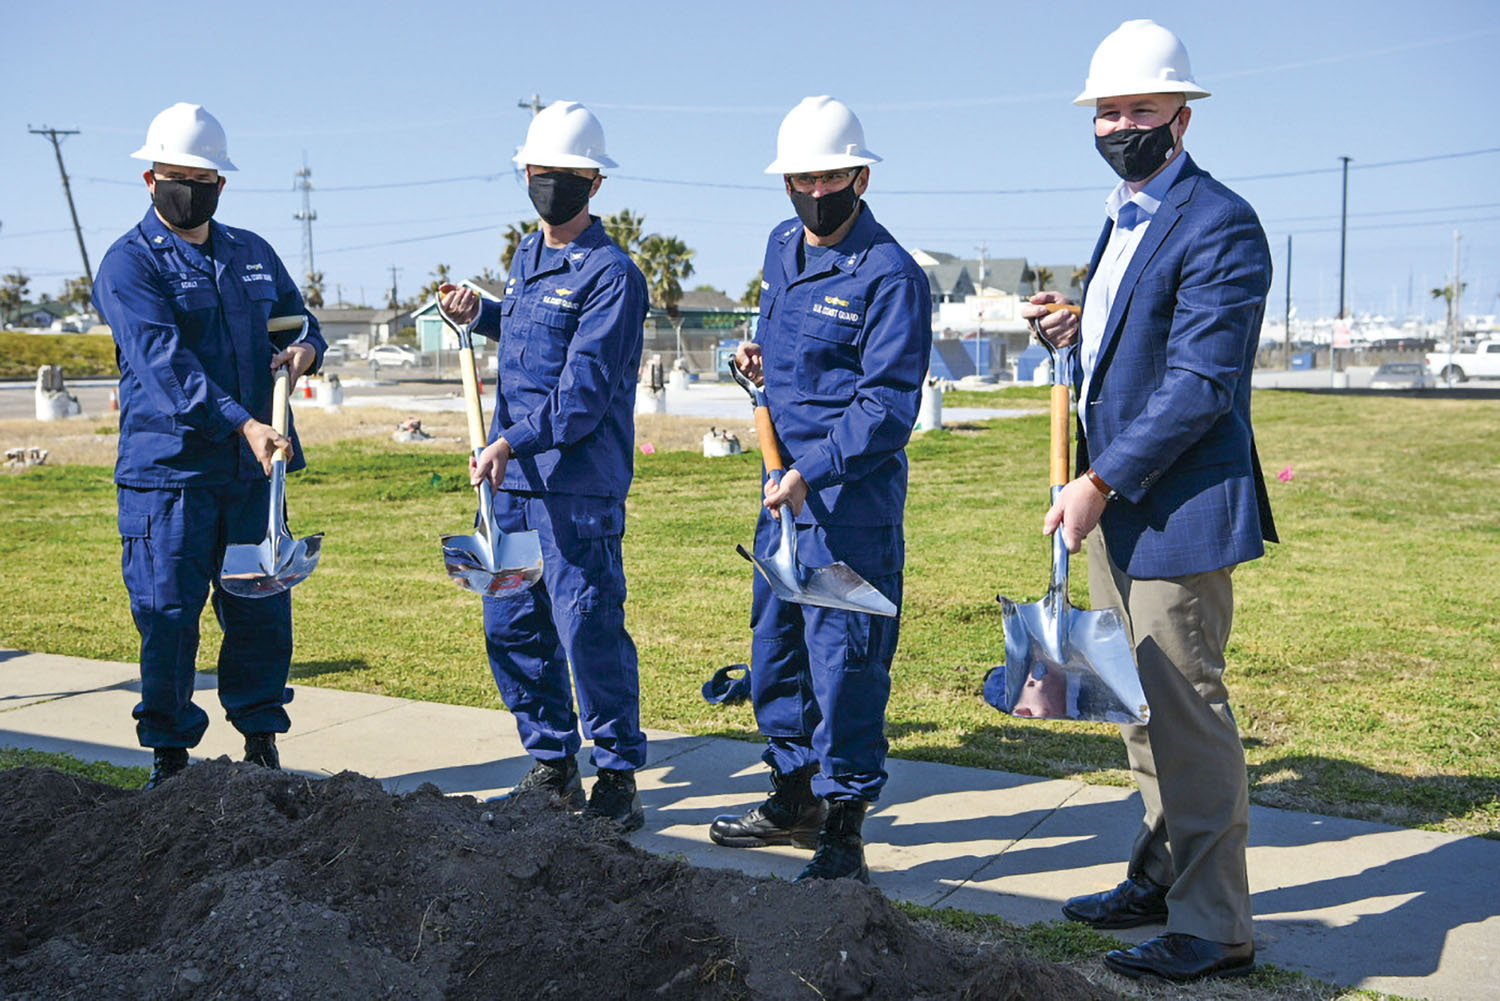 From left, Master Chief Petty Officer Jeffery Scully, officer-in-charge of Station Port Aransas; Capt. Edward Gaynor, commander of Coast Guard Sector/Air Station Corpus Christi; Rear Adm. John P. Nadeau, commander of Coast Guard Eighth District; and Aaron Glover, vice president at the Whiting-Turner Contracting Company, offically break ground for the new construction at Station Port Aransas during a ceremony at Coast Guard Station Port Aransas, Texas, February 22. The previous buildings at the station were heavily damaged during Hurricane Harvey in 2017. (Photo by U.S. Coast Guard Petty Officer 2nd Class Ryan Dickinson)